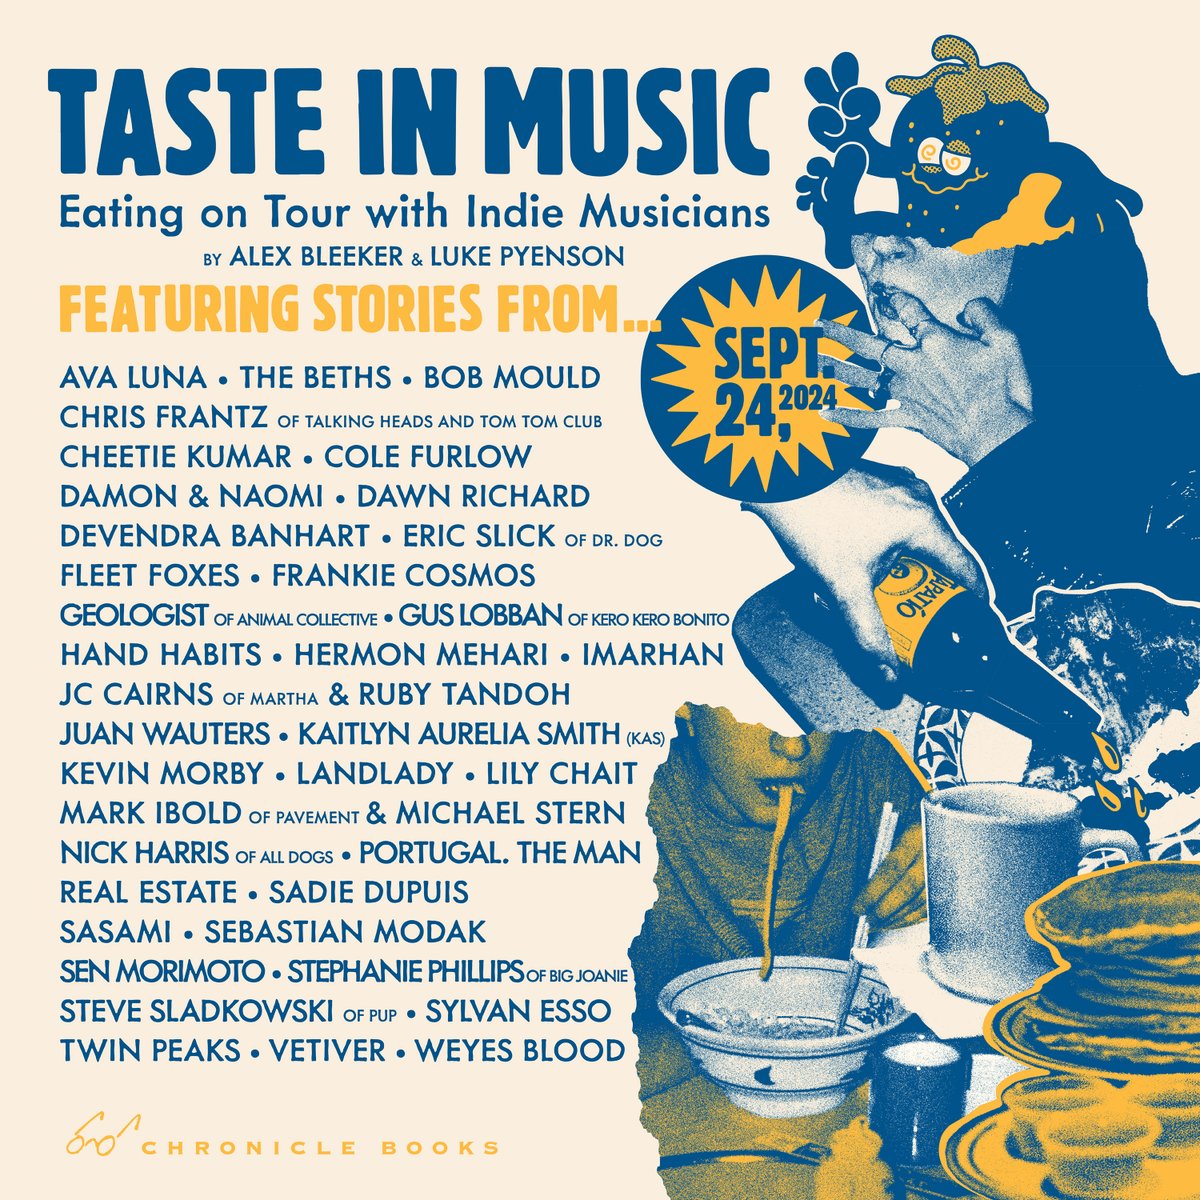 Weyes Blood, Bob Mould, Robin Pecknold & more share eating-on-tour stories in Alex Bleeker's new book 'Taste in Music' brooklynvegan.com/weyes-blood-bo…